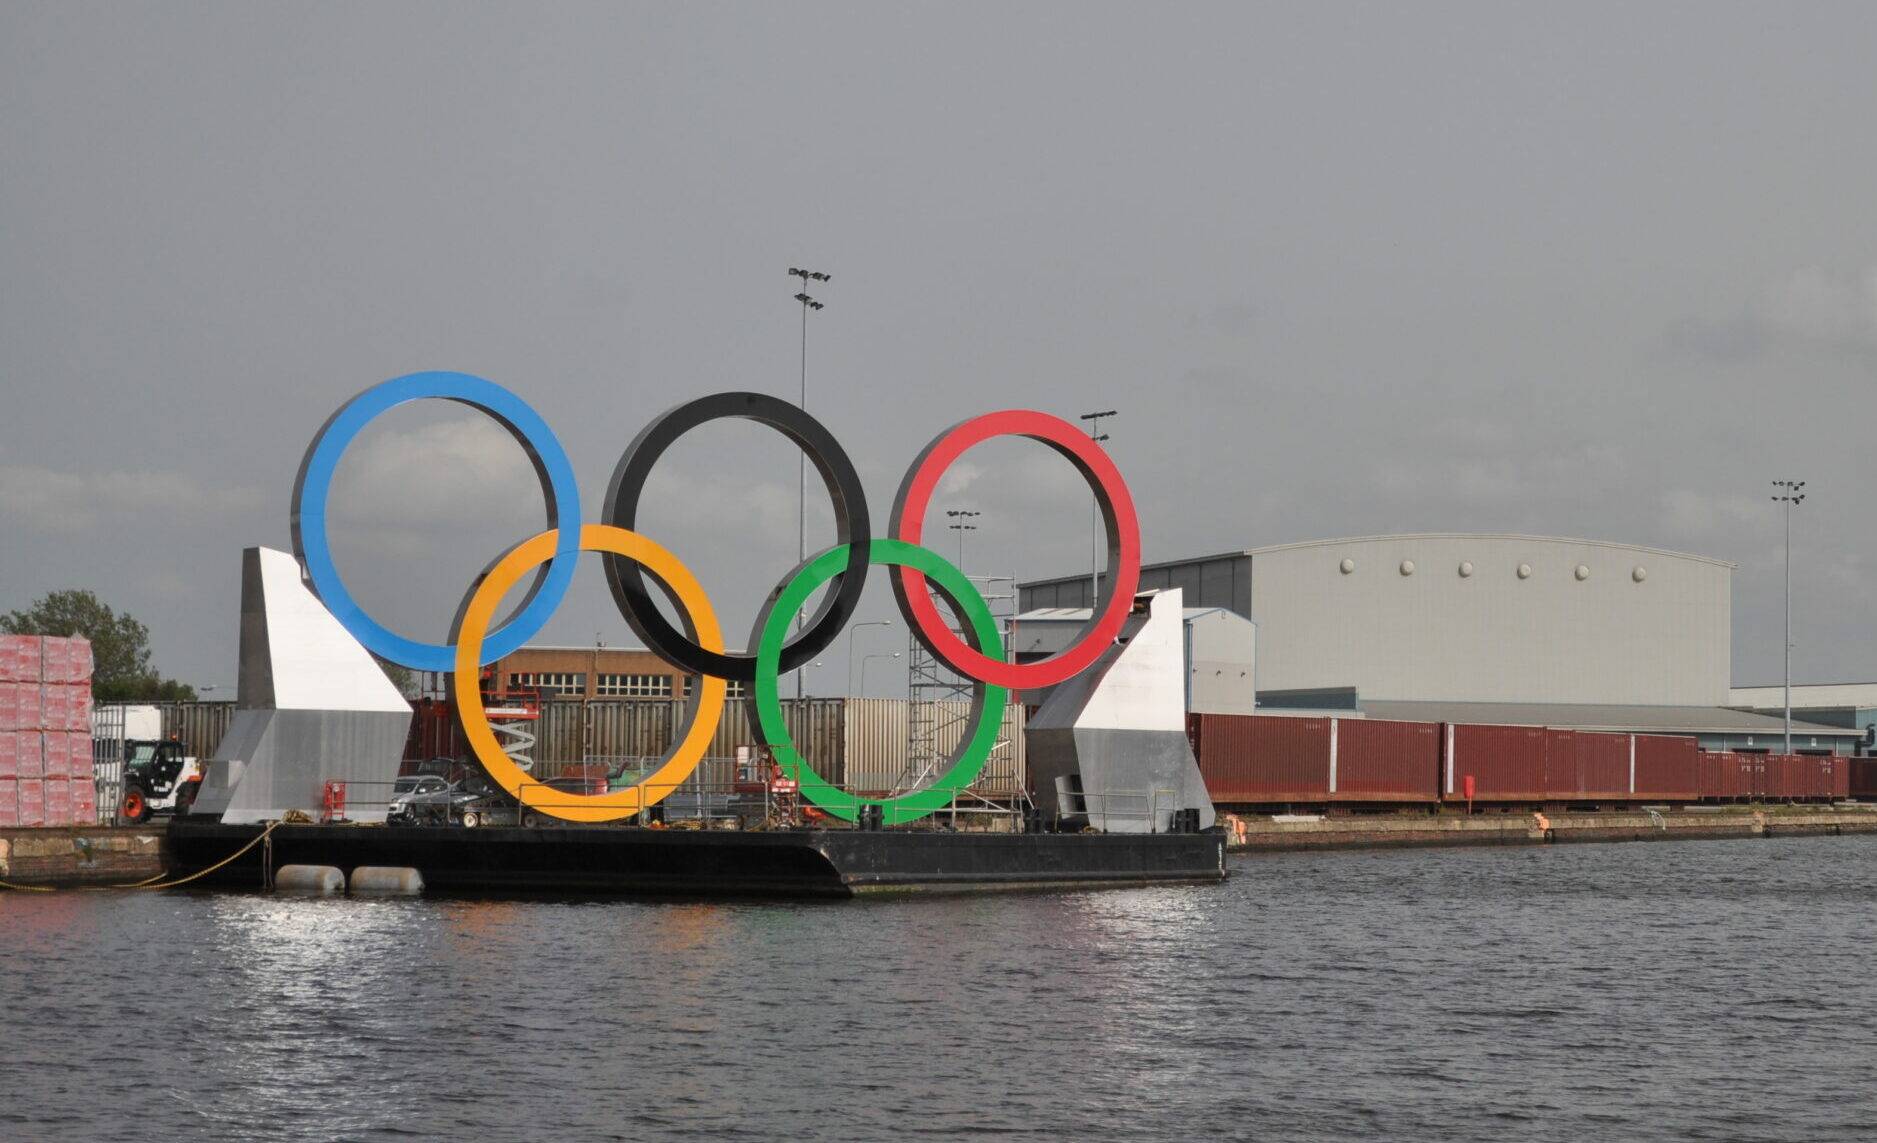 Olympic rings on a barg, on the river